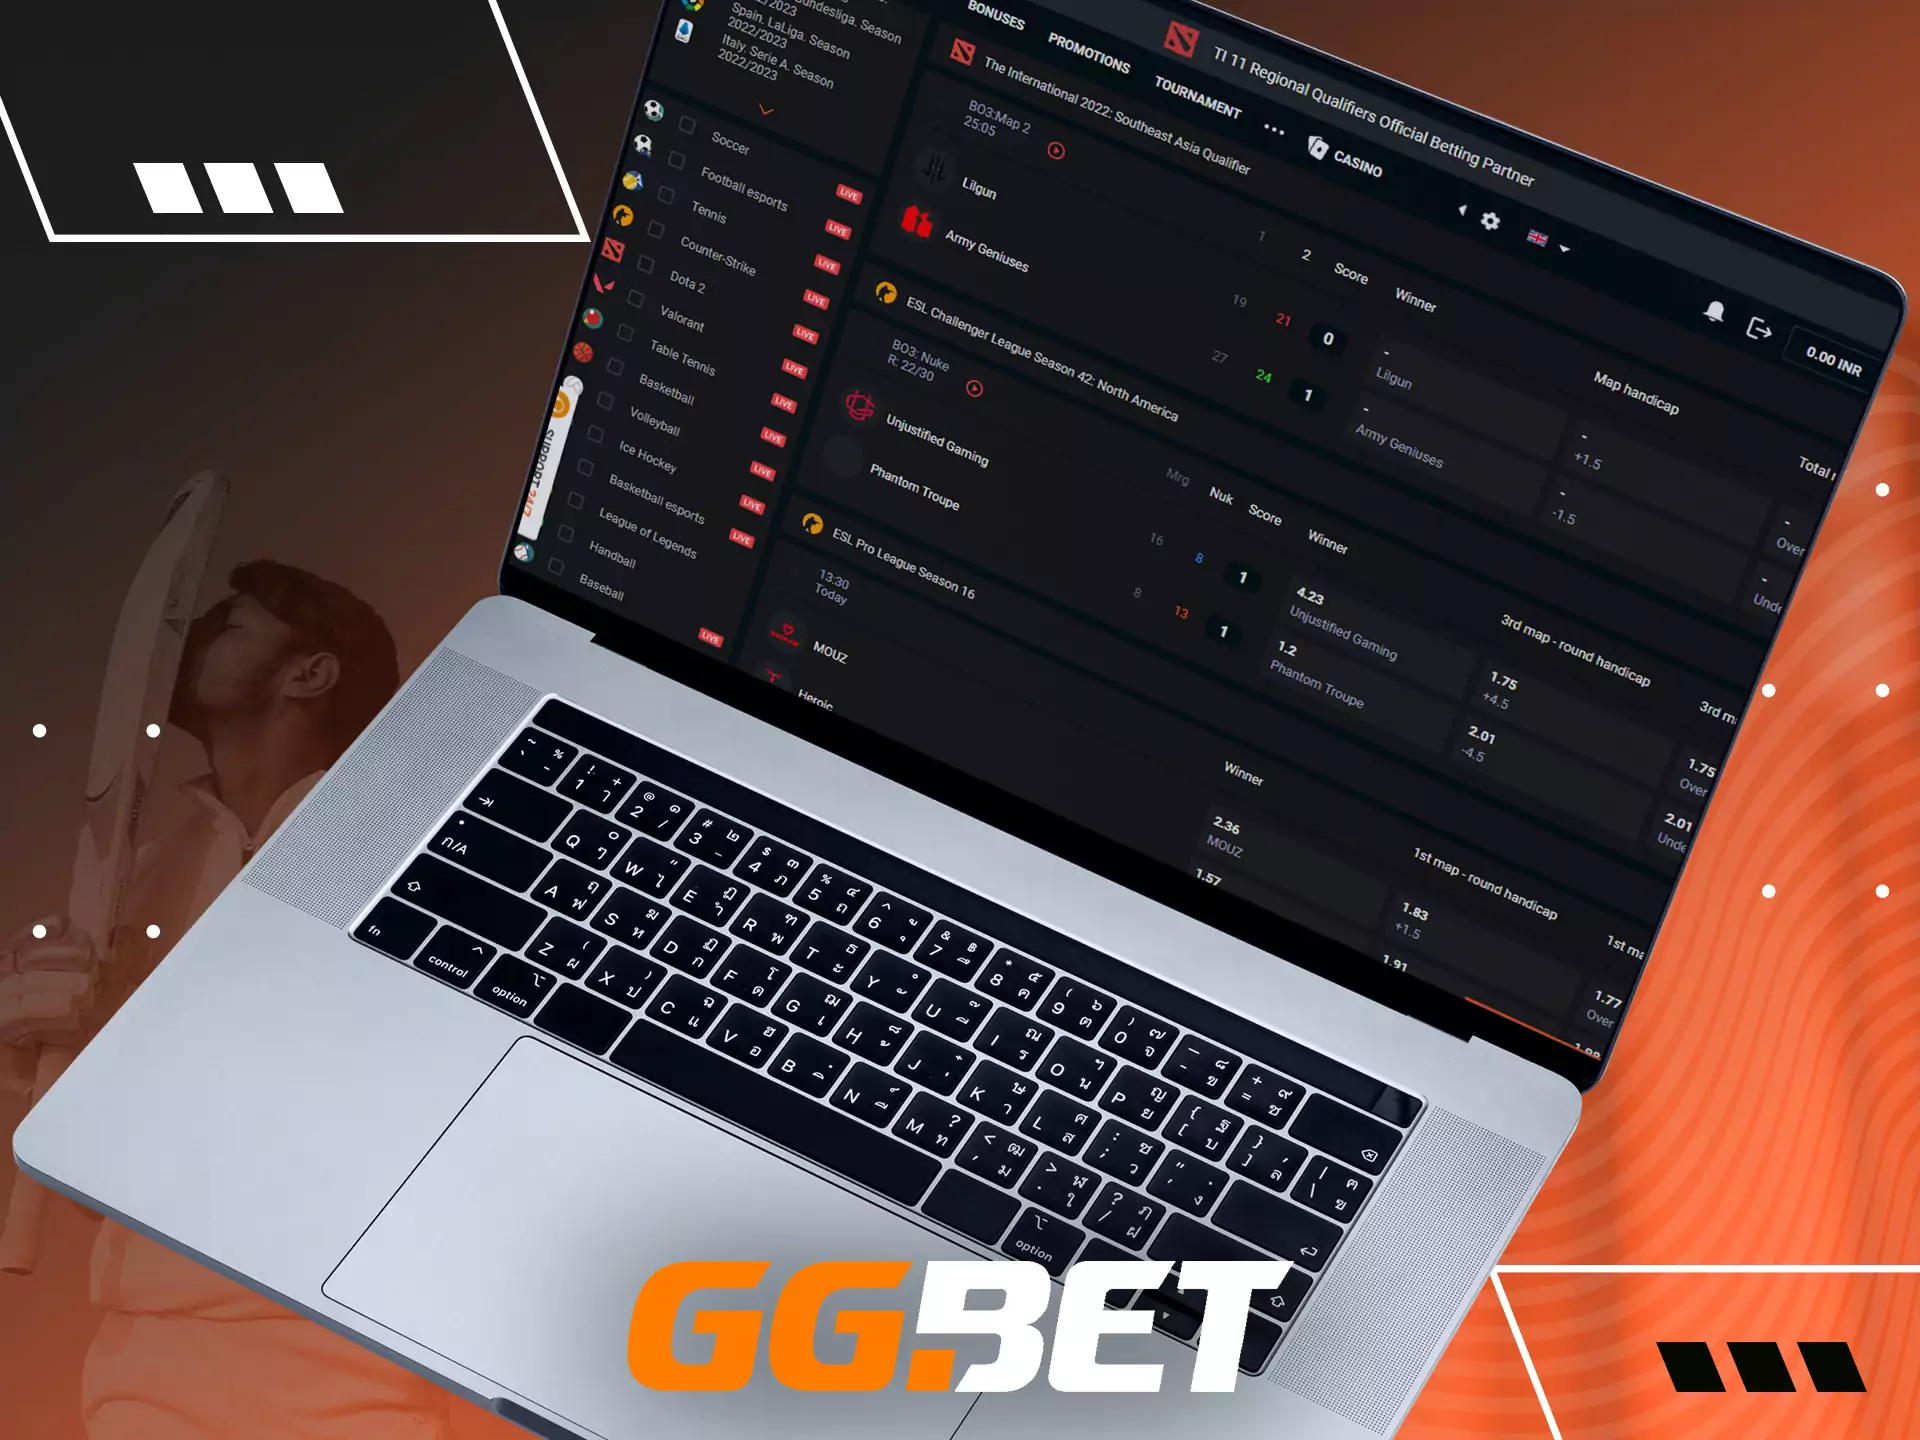 The GGBet official website works correctly on desktop and mobile devices.